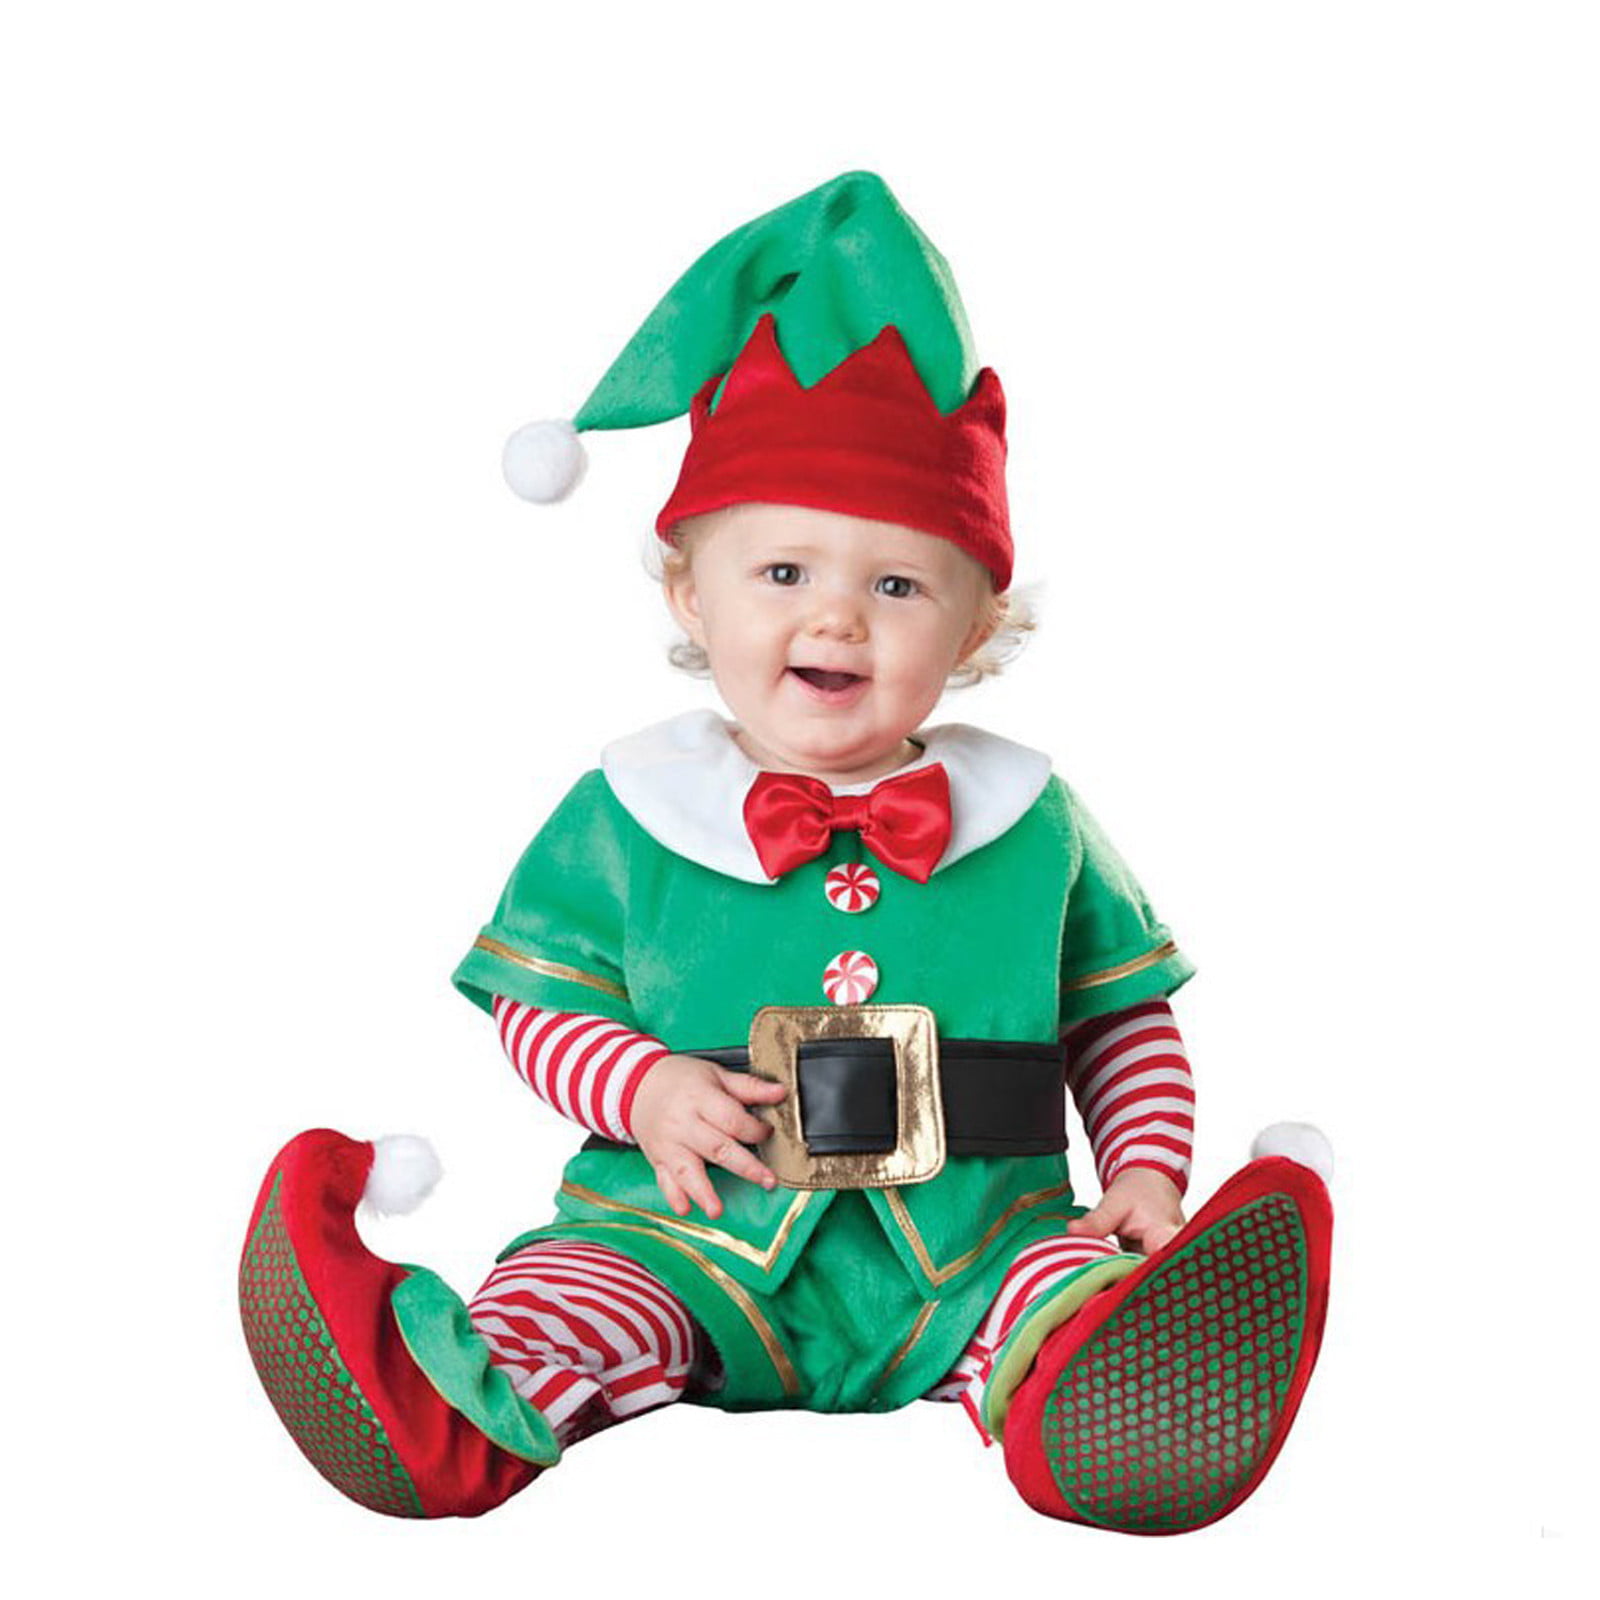 Christmas Kids Girls Boys Casual Outfits Elf Cosplay Costume Xmas Dress/Jumpsuit 